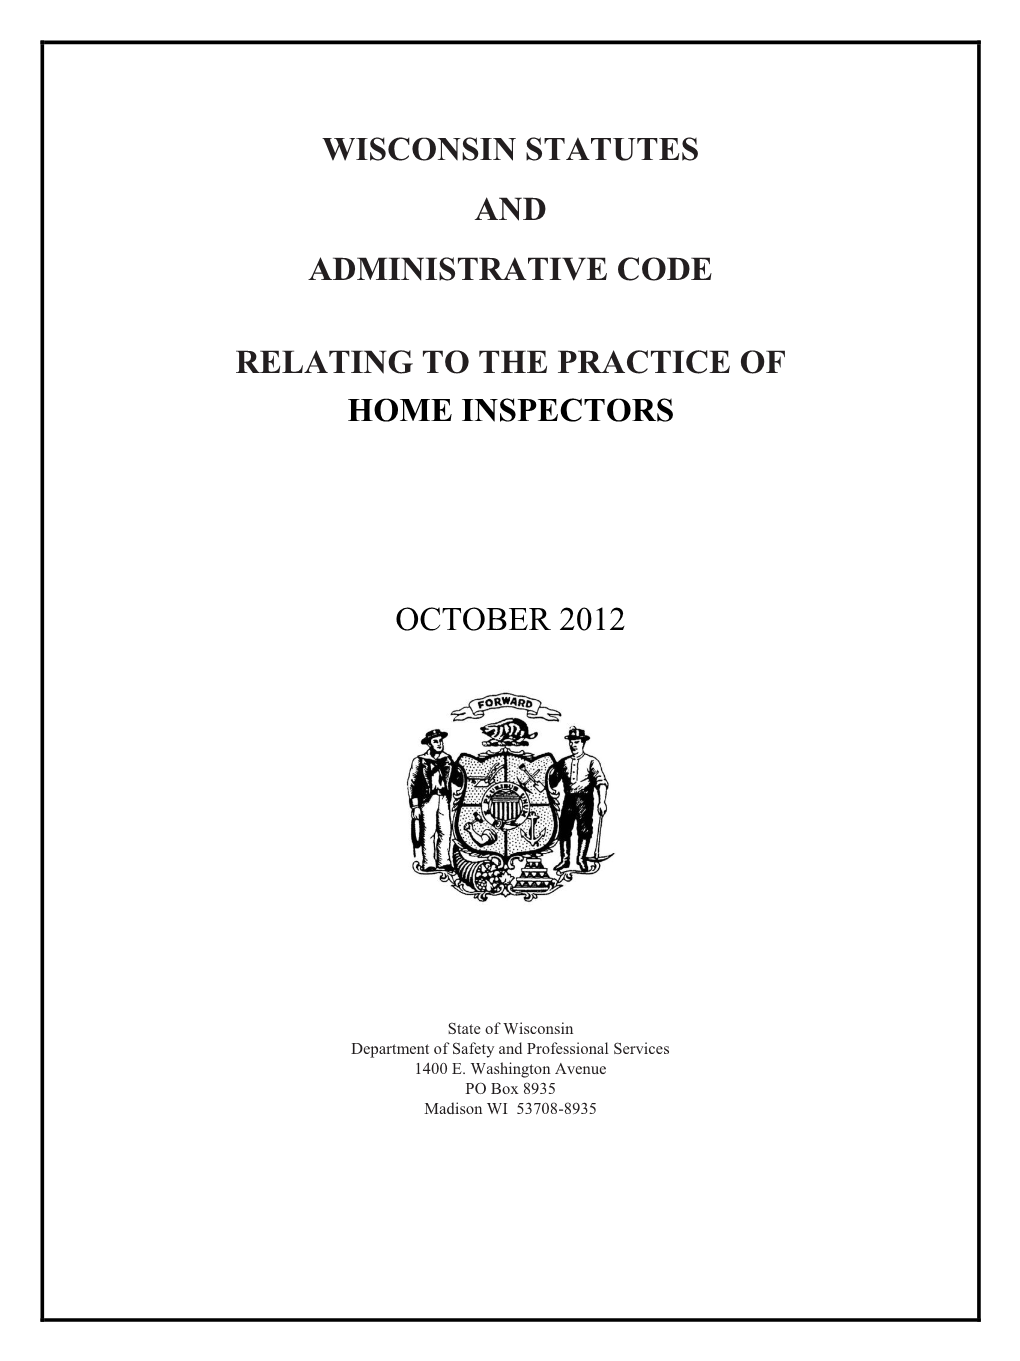 Wisconsin Statutes and Administrative Code Relating to the Practice Of